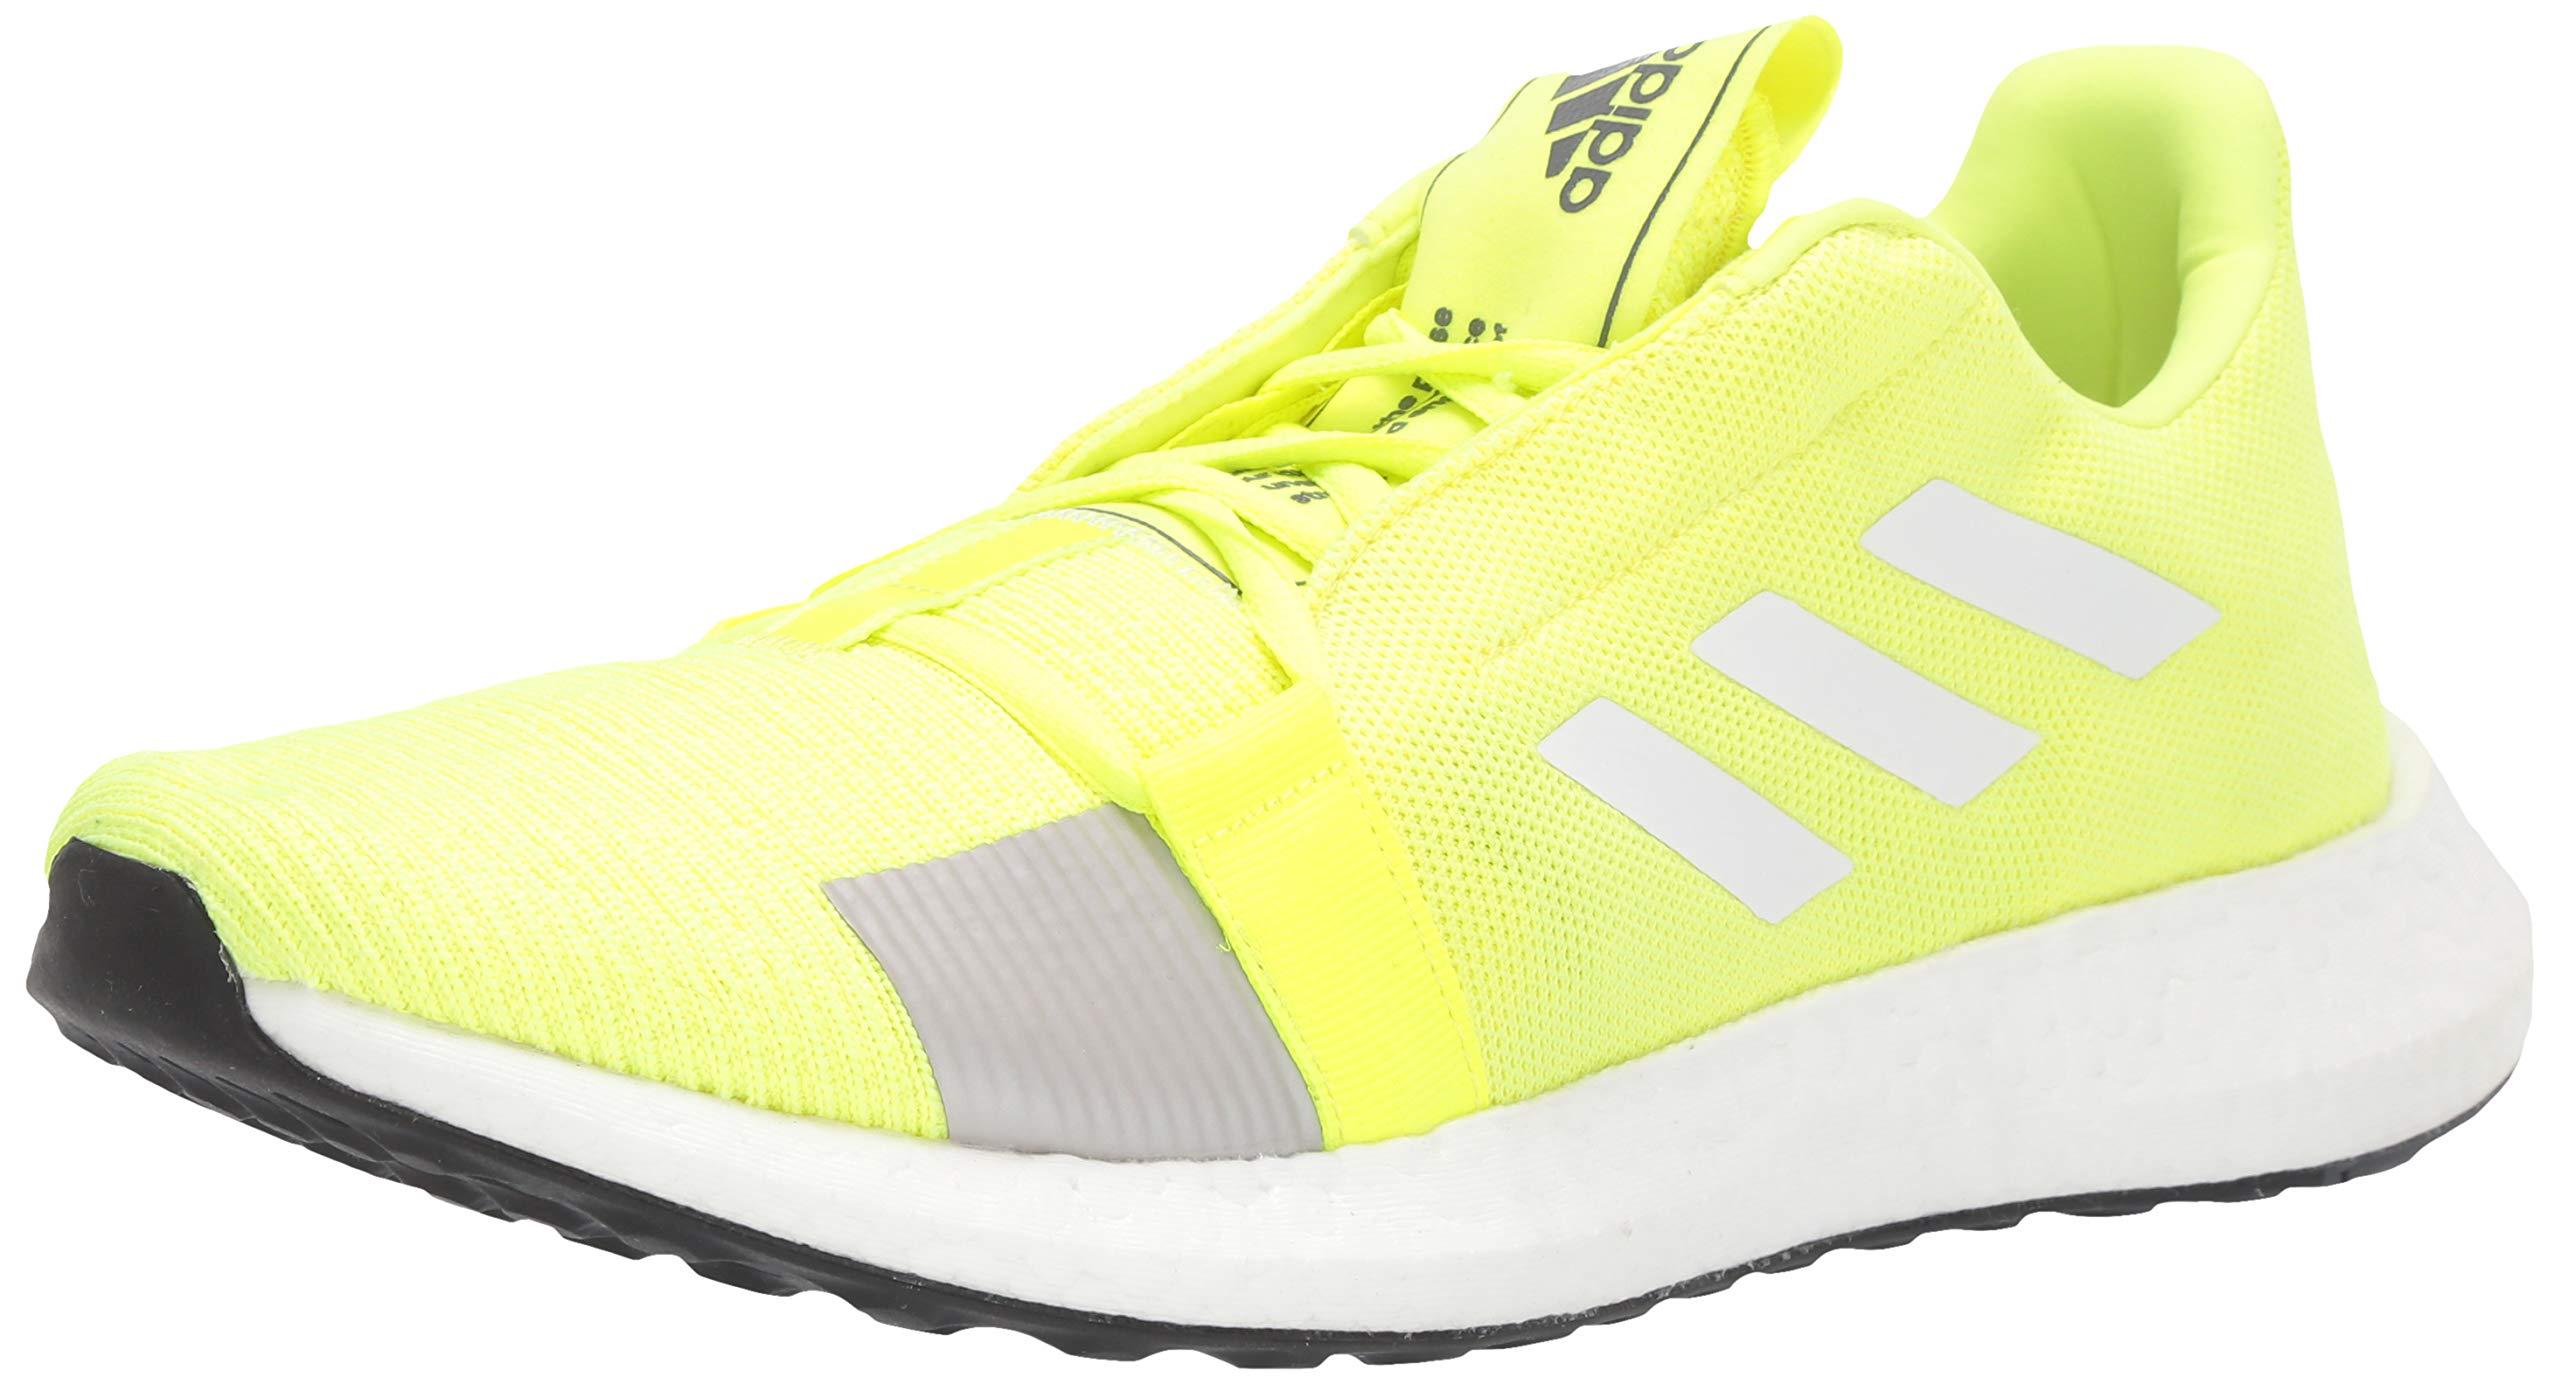 adidas Synthetic Senseboost Go M Running Shoe in Yellow for Men - Save 66%  | Lyst